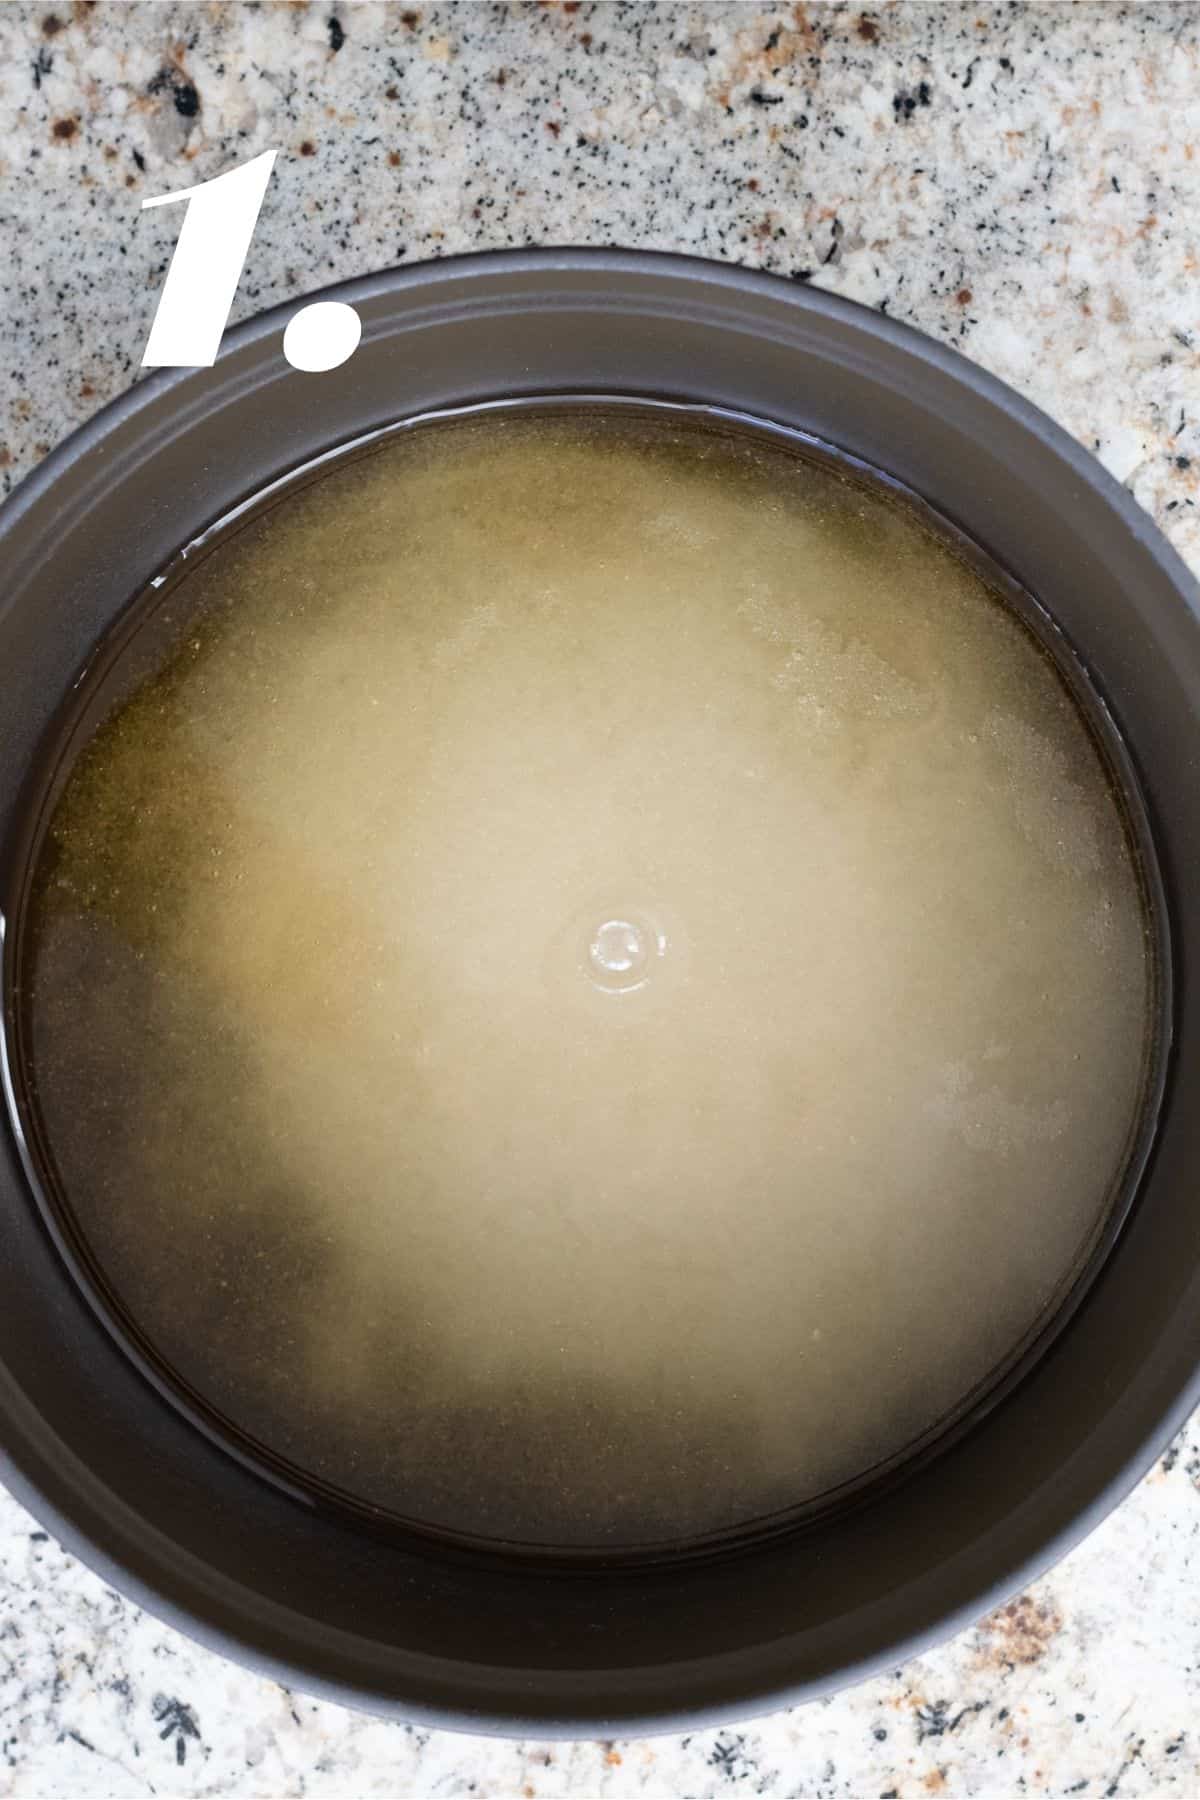 Agave, cane sugar and water mixed together in large heavy pot.